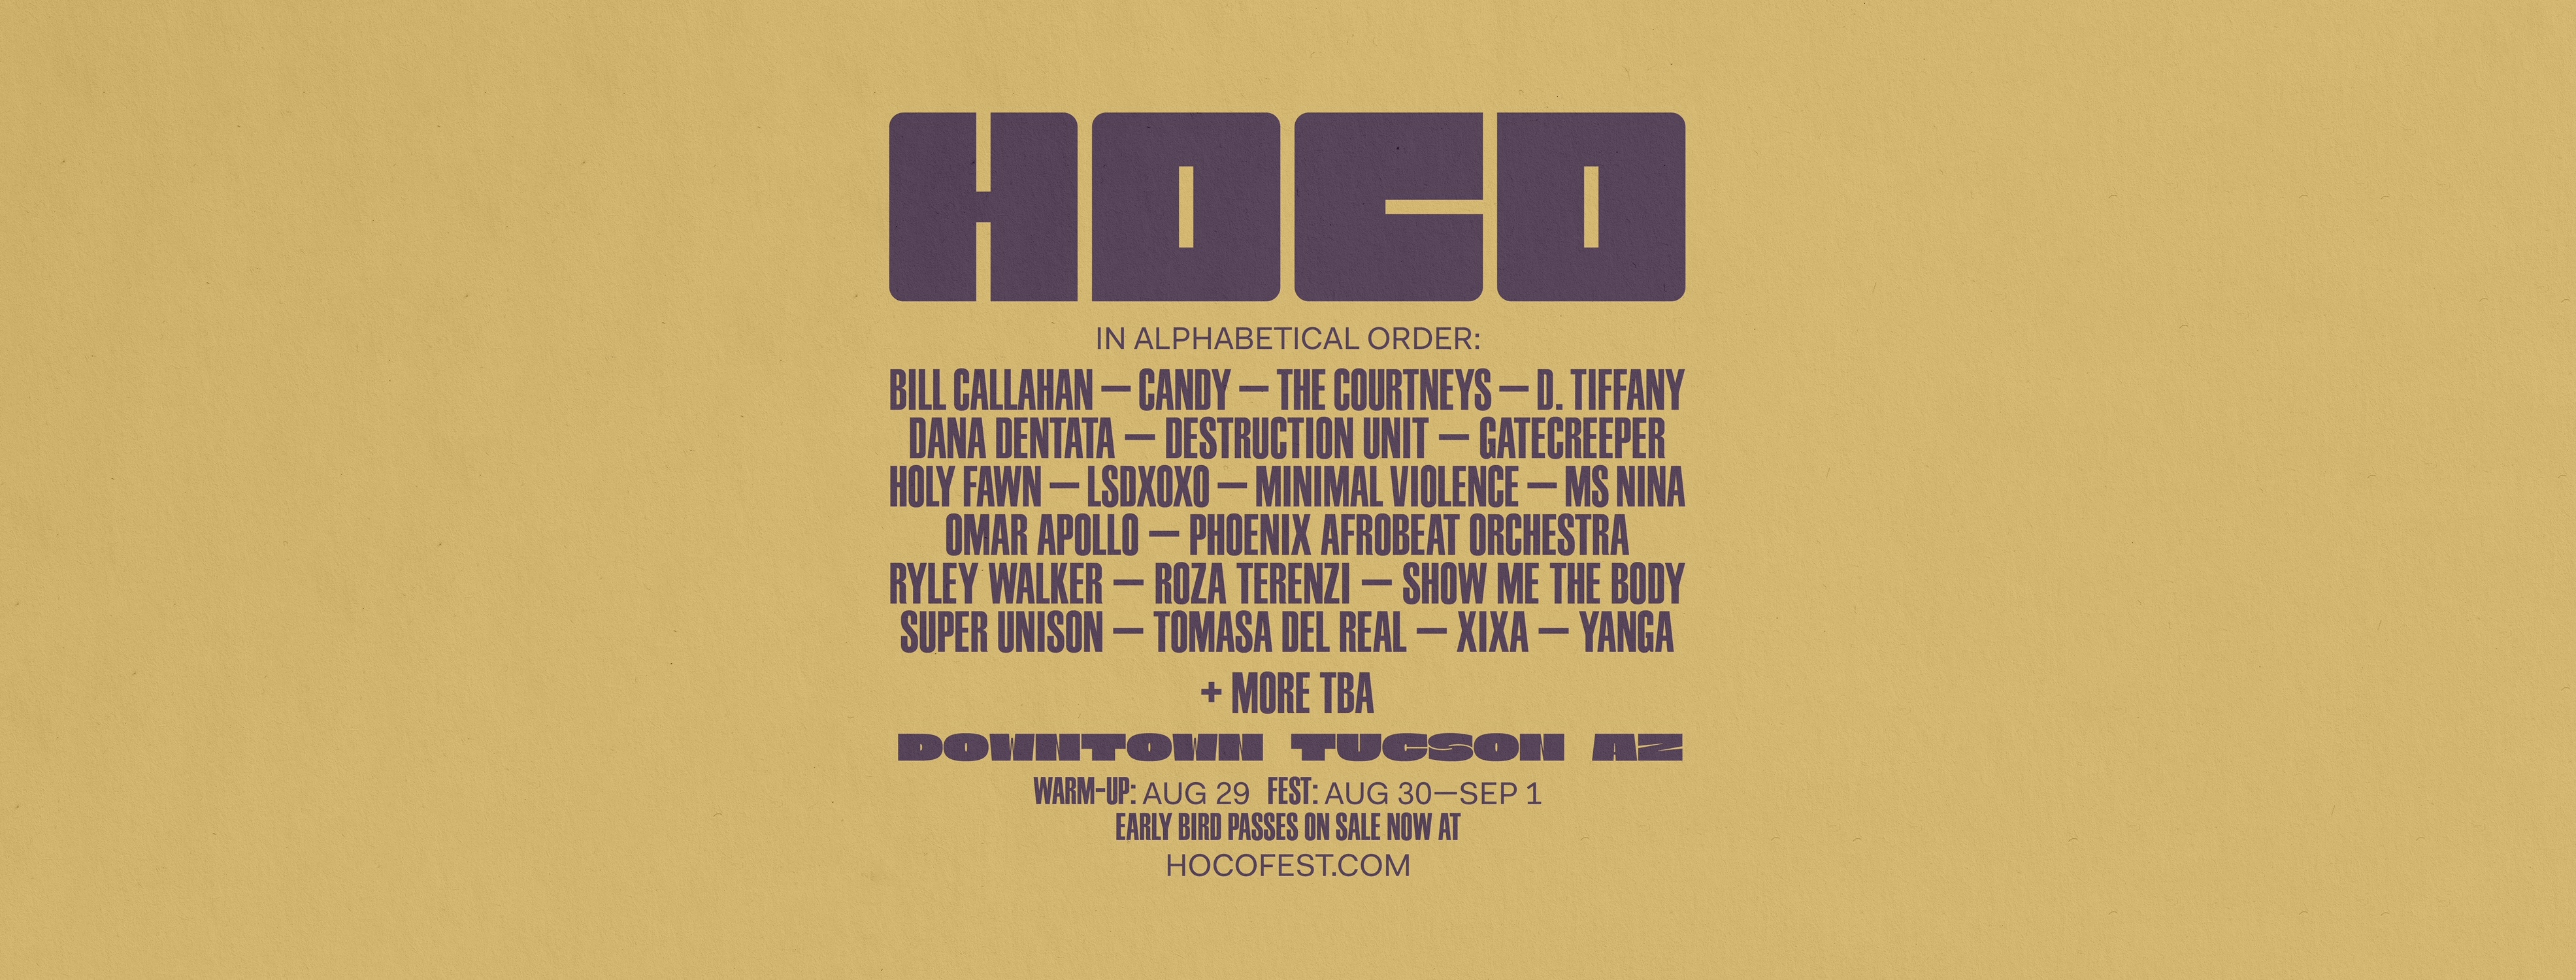 HOCO Fest at Hotel Congress in downtown Tucson